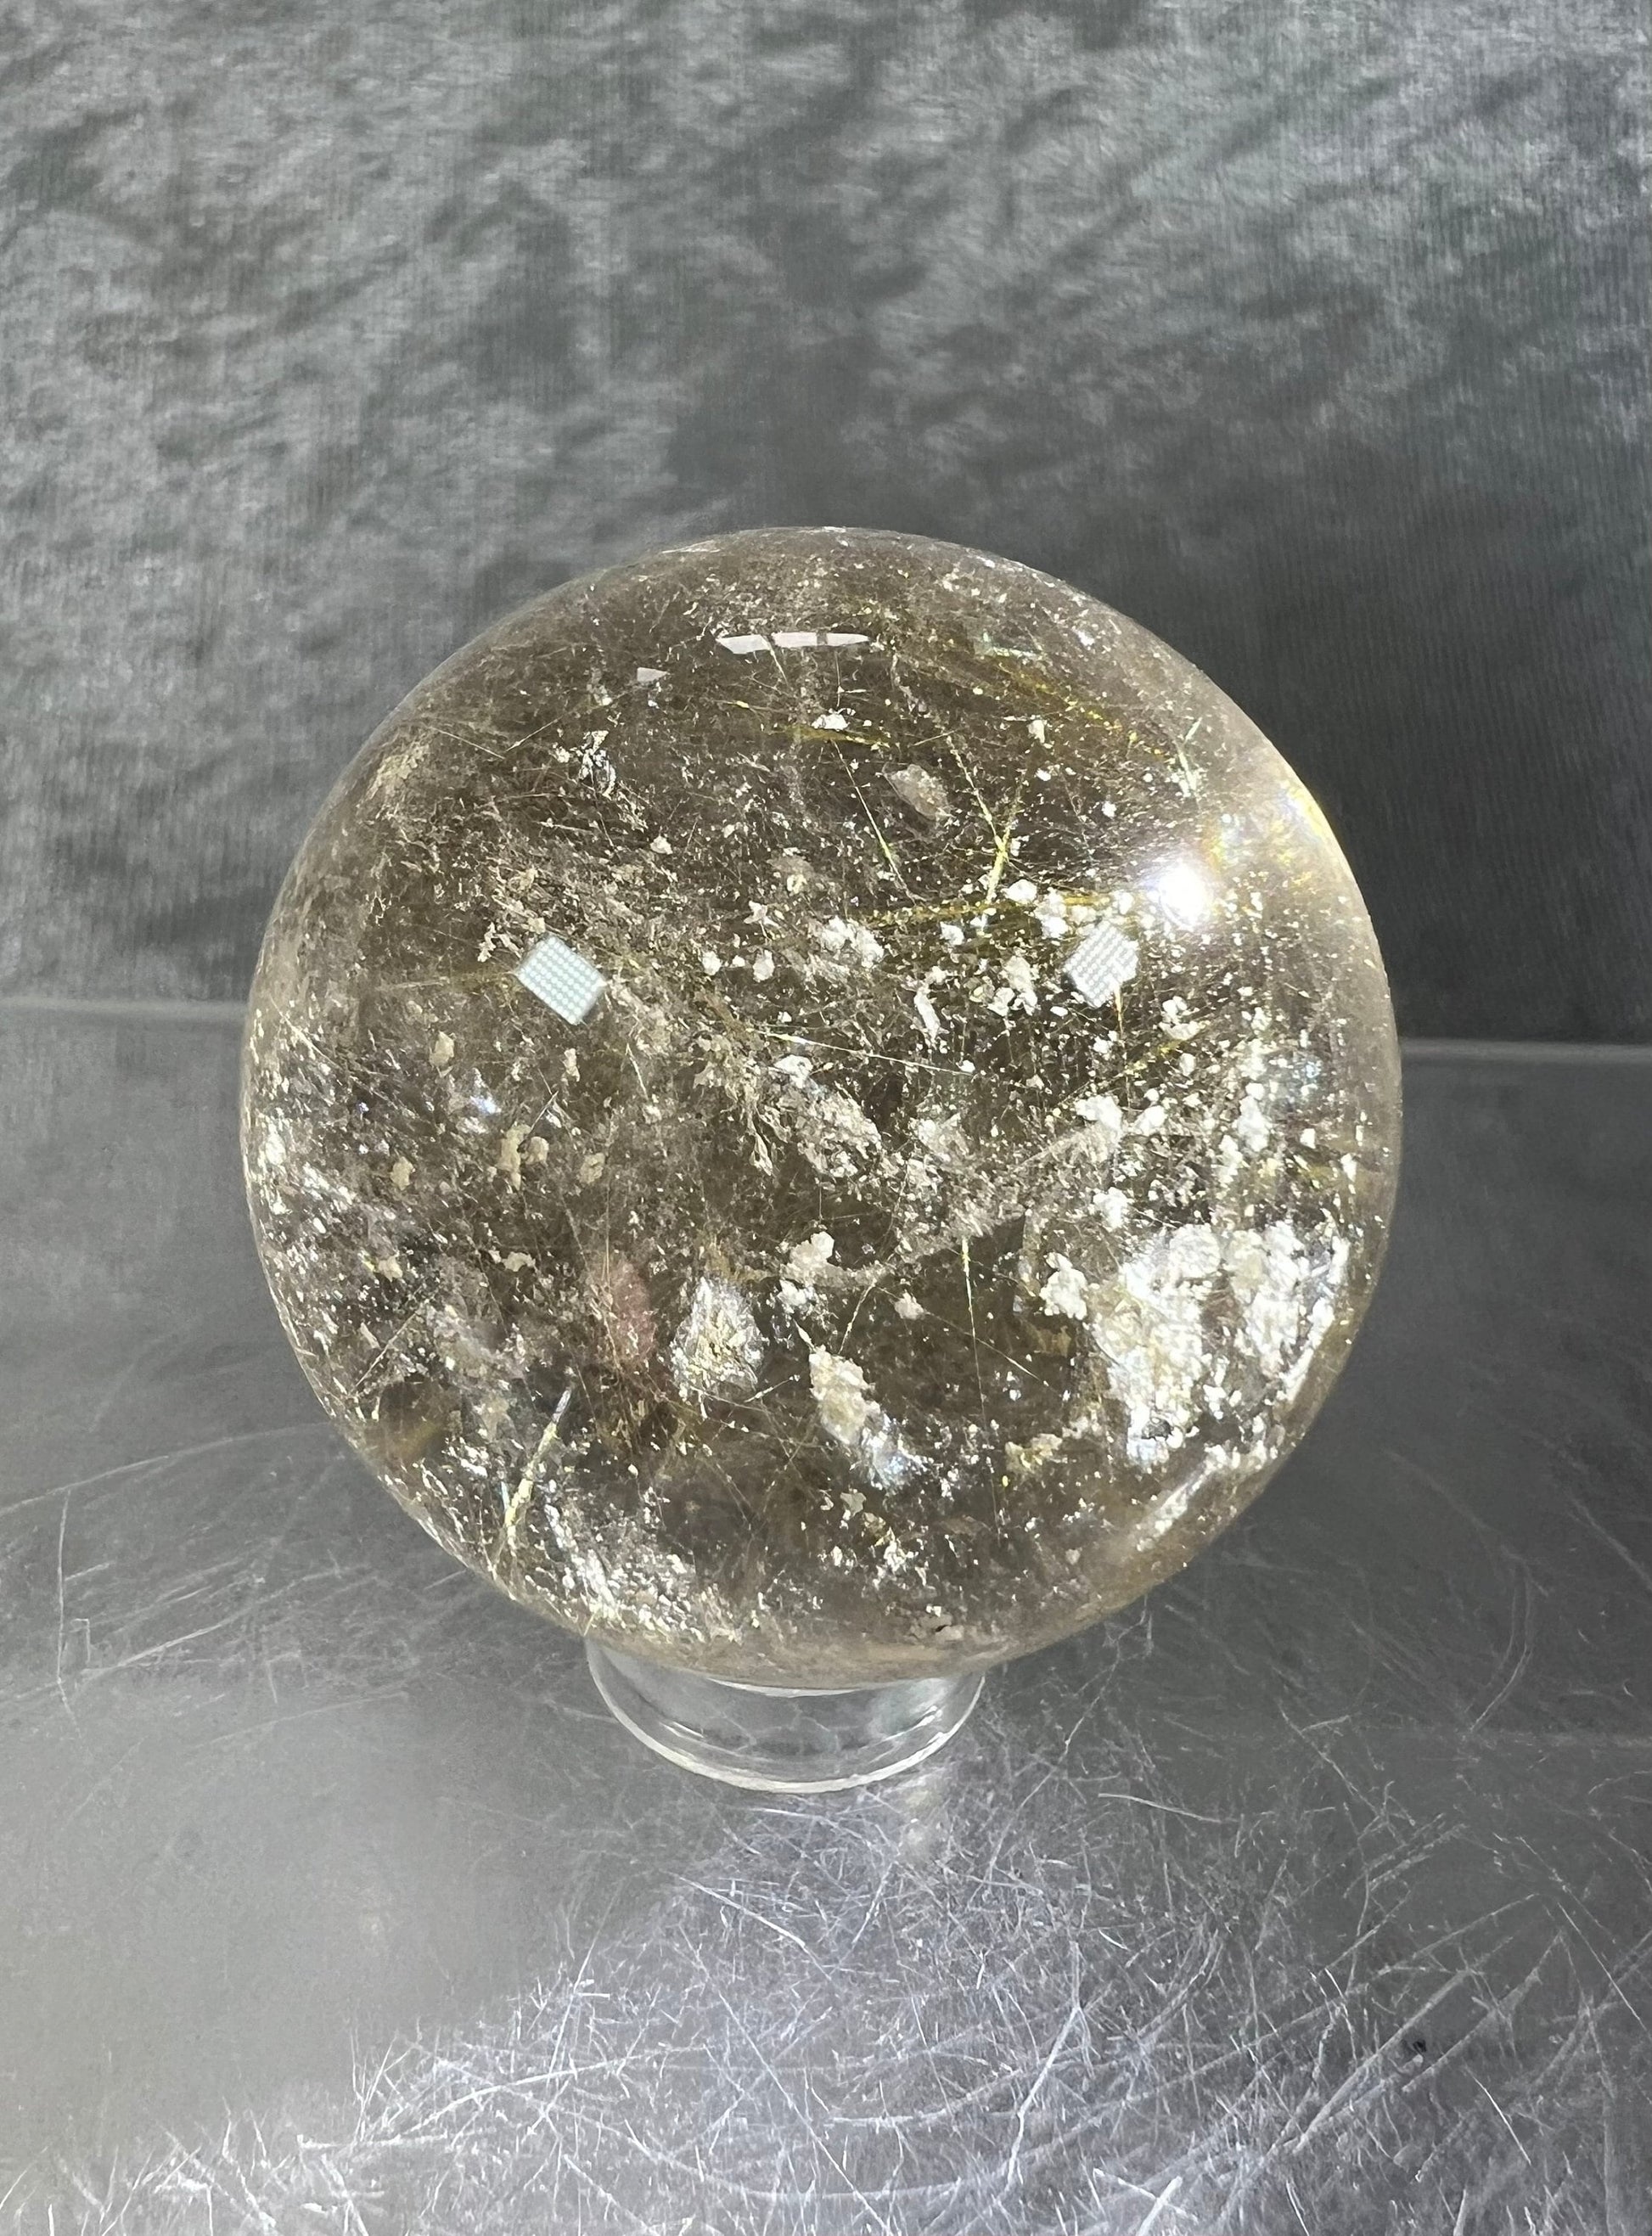 Gorgeous Rutile And Garden Quartz Sphere. Amazing Golden Rutile Inclusions. Incredible Crystal Sphere